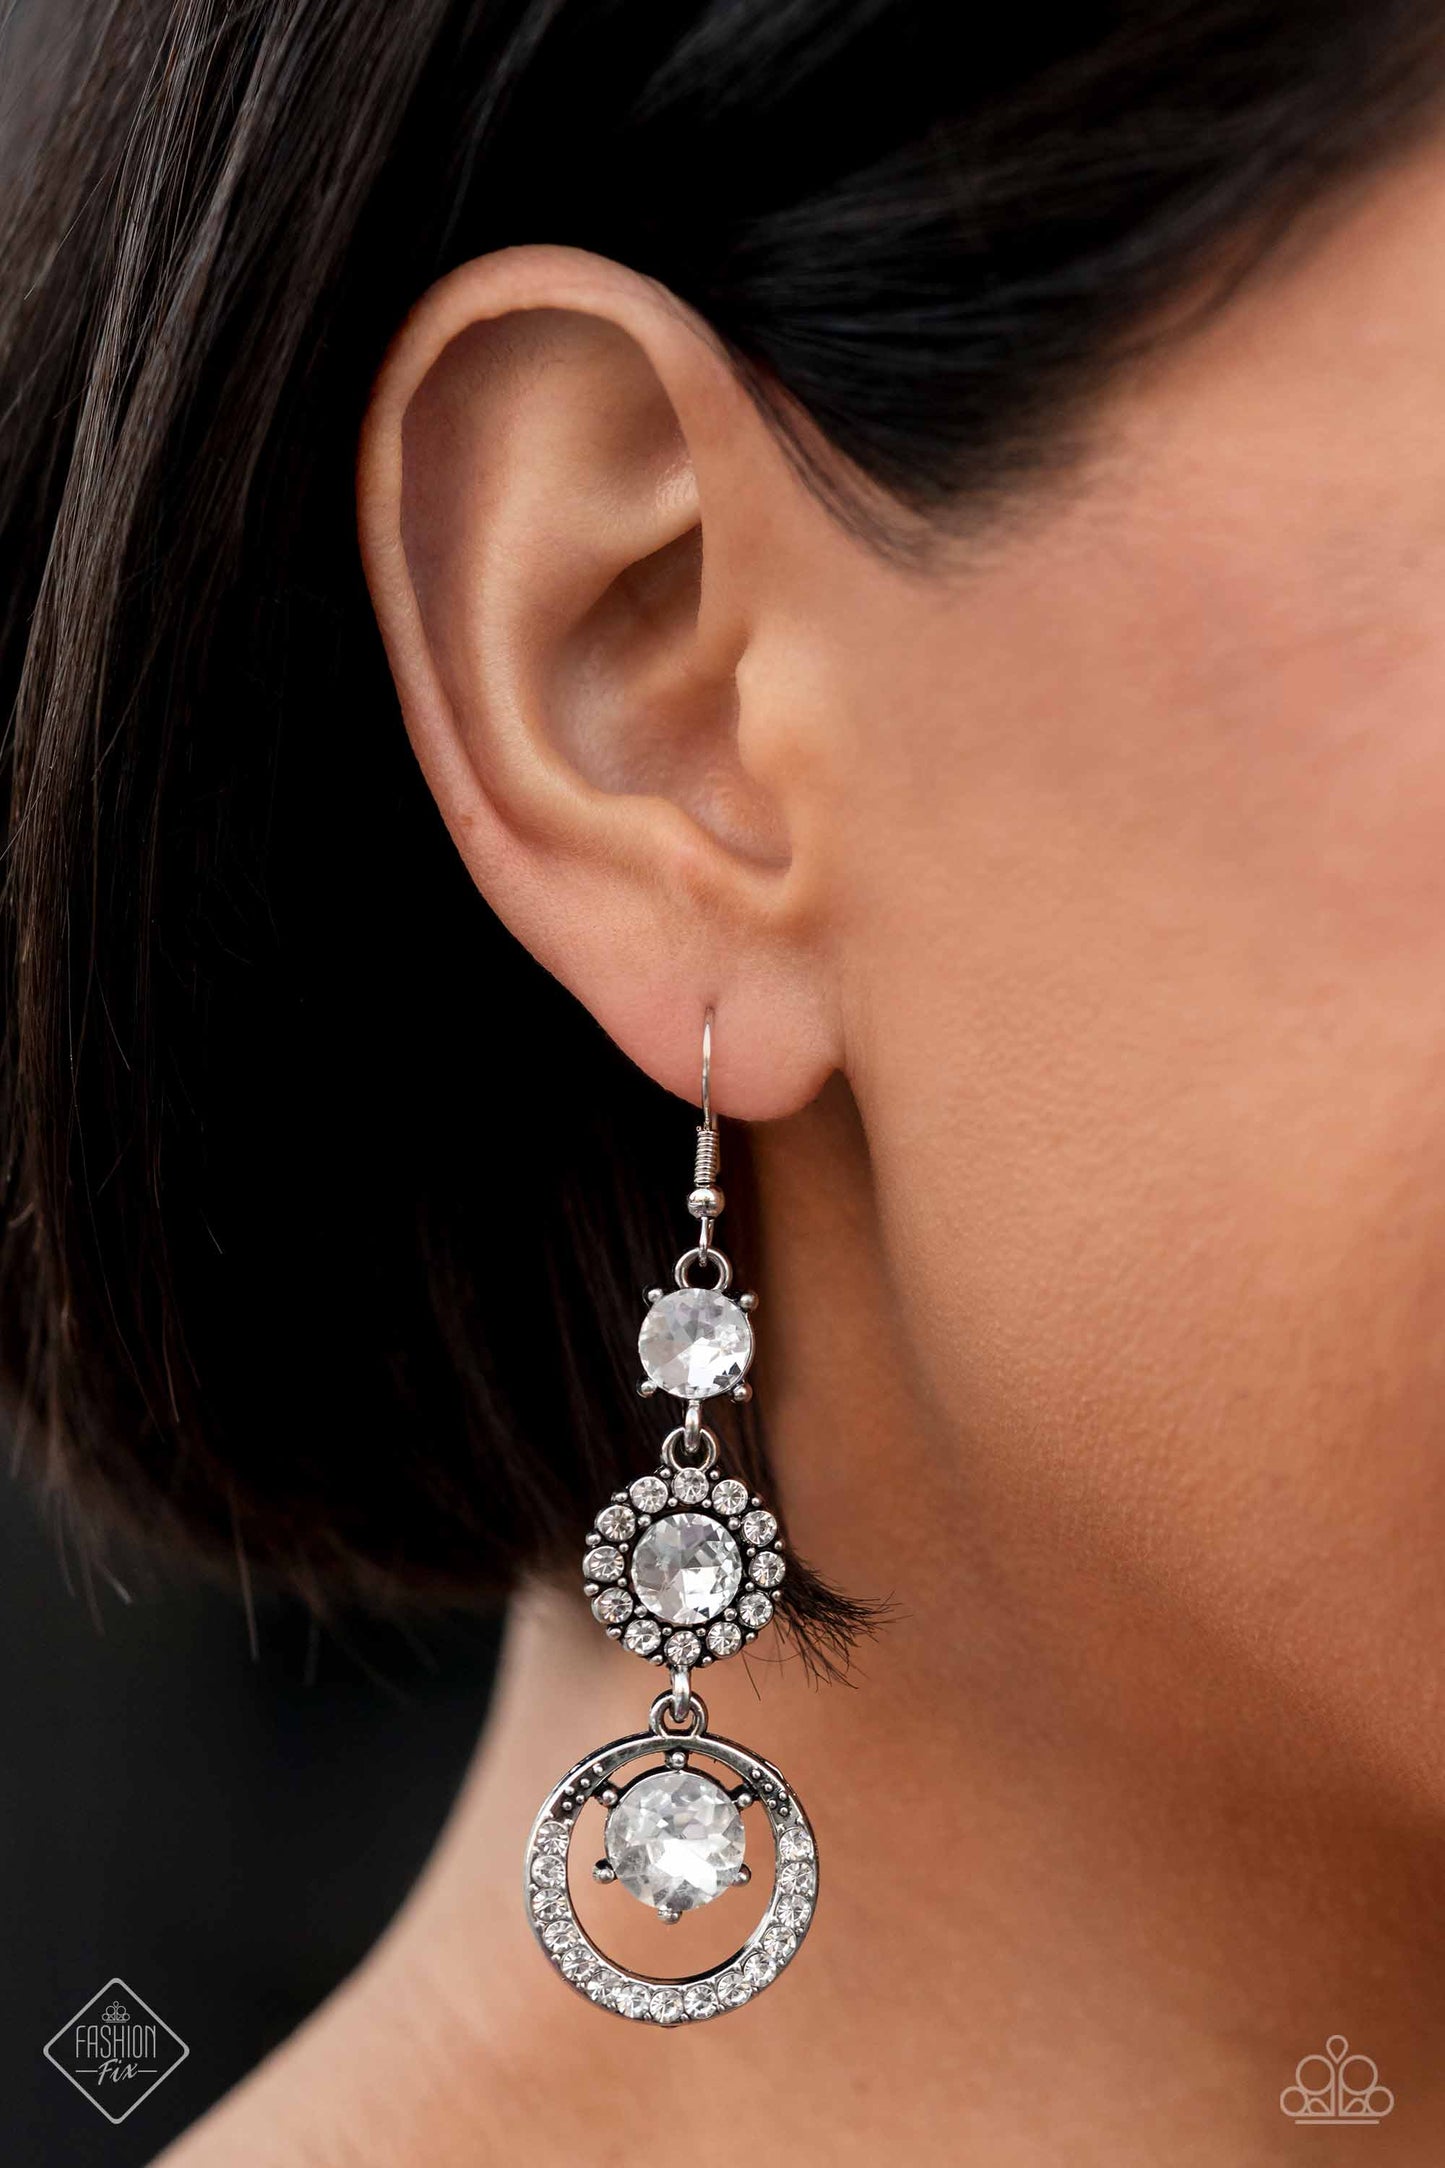 Enchanting Effulgence - White Gem and Silver Earrings - Paparazzi Accessories - A glamorous collection of brilliant, round, white gems drip down the ear, creating an irresistibly refined lure. The topmost gem features pronged fittings, followed by the center gem that is bordered by a halo of dainty white rhinestones for additional eye-catching shimmer. Encircling the lower-most gem, an airy, rhinestone-encrusted hoop completes the dazzling design.